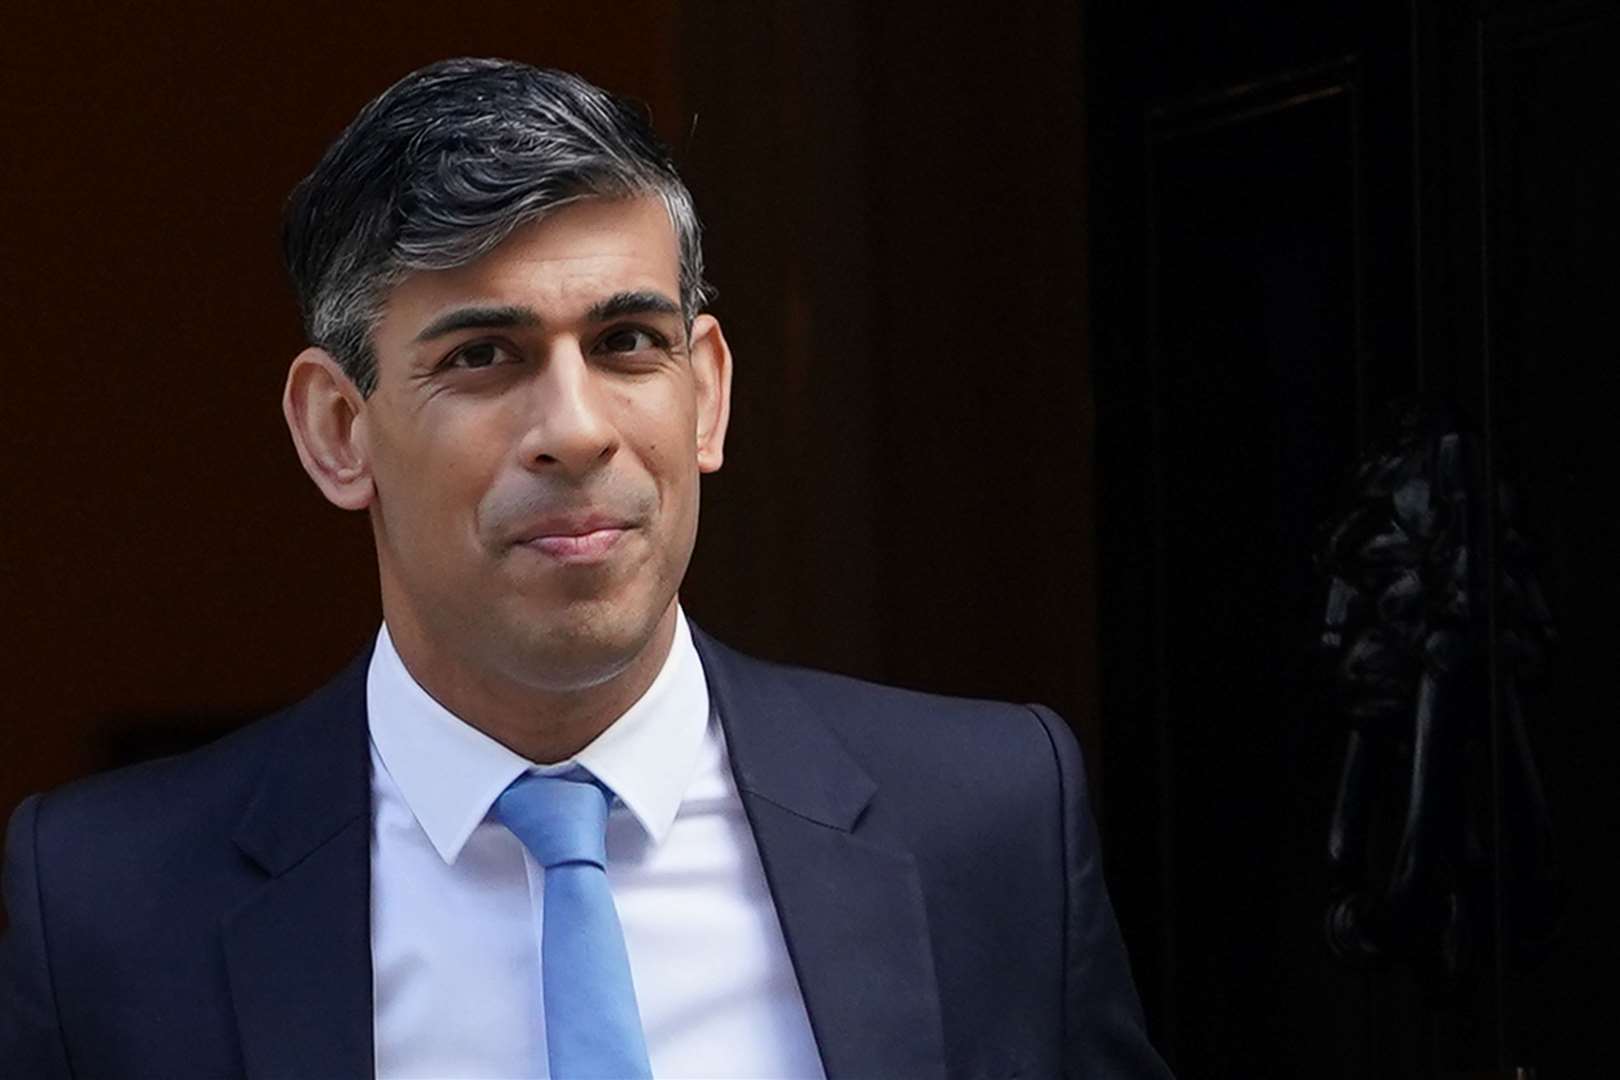 Prime Minister Rishi Sunak has declined to say whether Mr Menzies should quit as Fylde MP (Lucy North/PA)